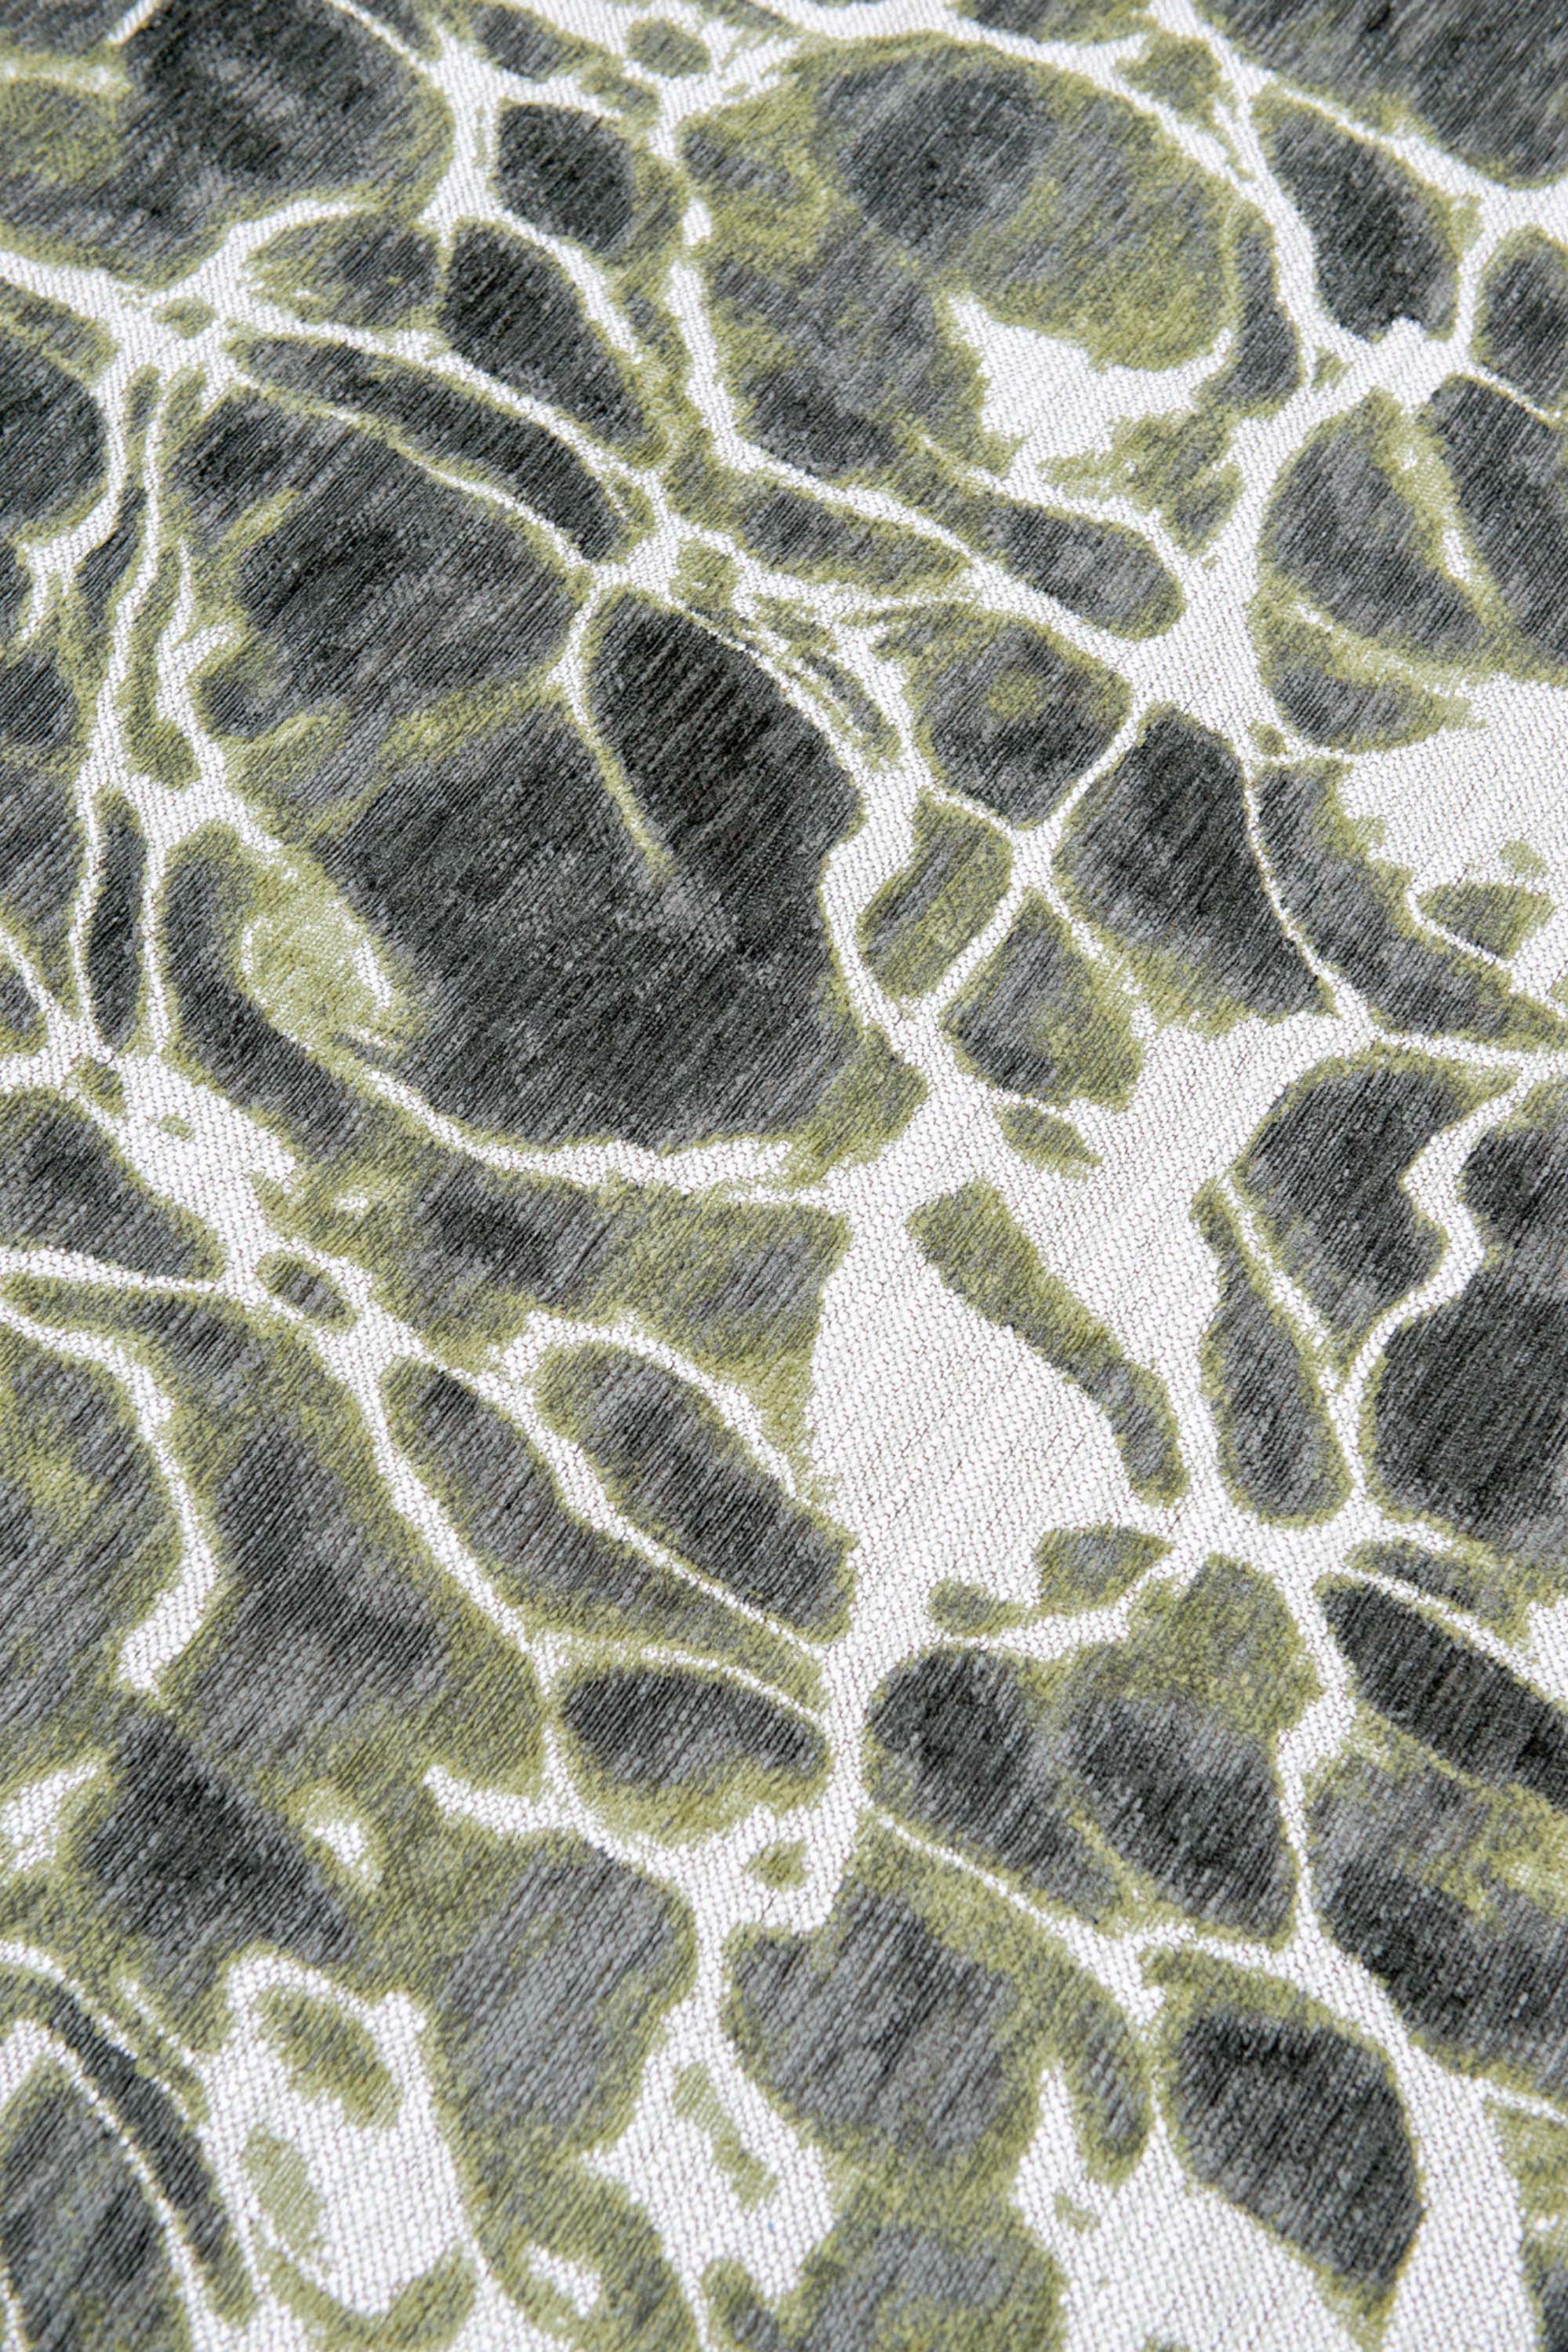 Modern rug with green abstract water inspired pattern